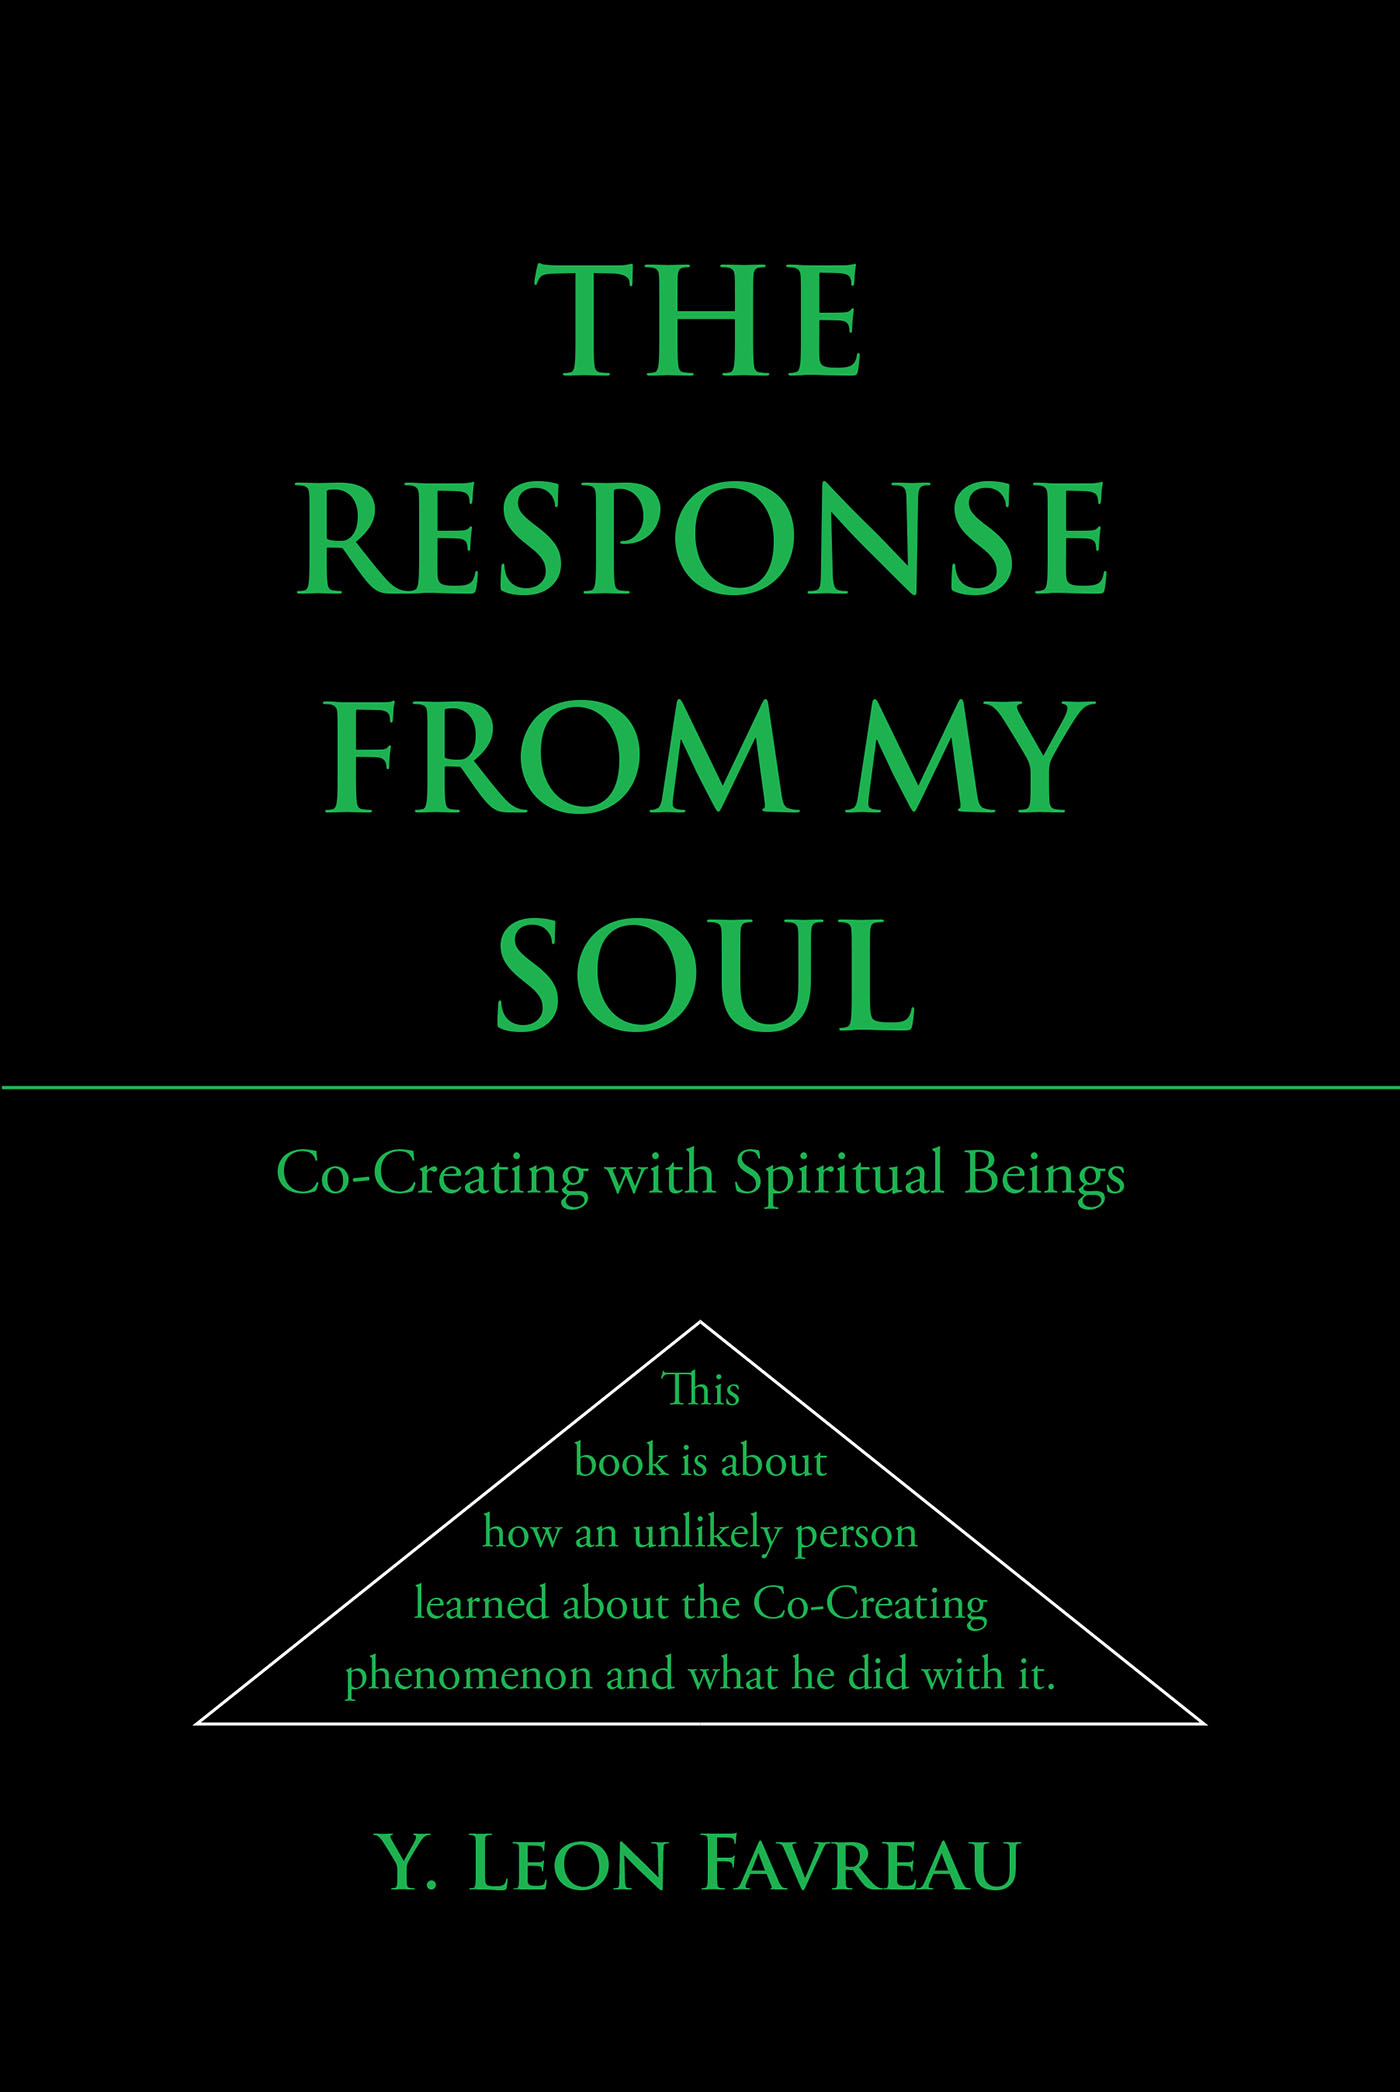 Author Y. Leon Favreau’s New Book “The Response from My Soul: Co-Creating with Spiritual Beings” Shares Impactful Information About the Interconnectedness of the Universe